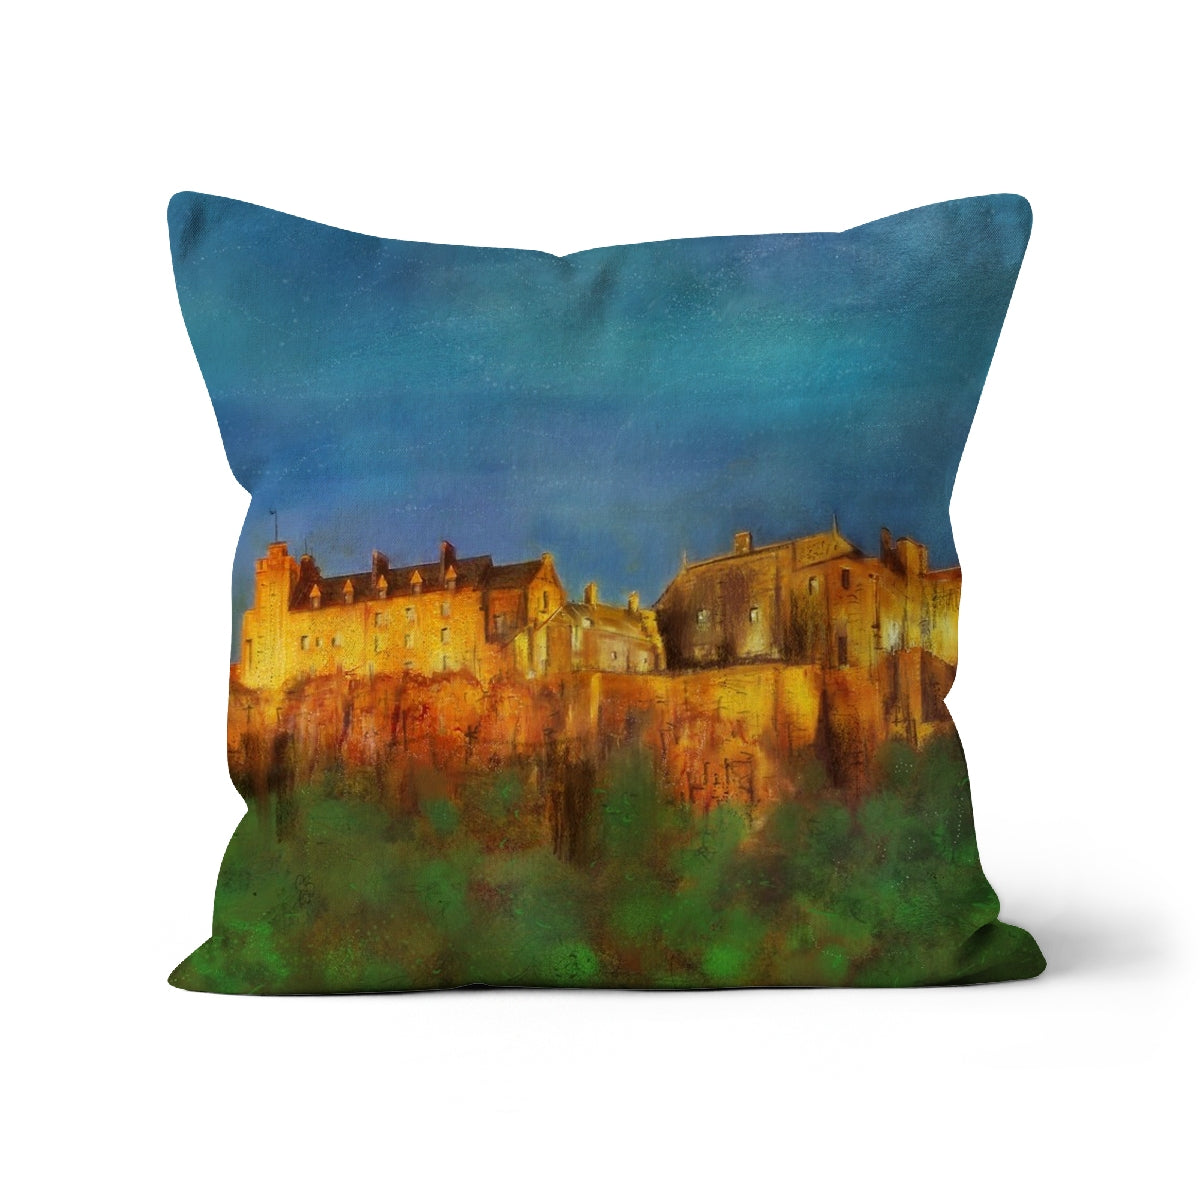 Stirling Castle Art Gifts Cushion-Cushions-Historic & Iconic Scotland Art Gallery-Canvas-22"x22"-Paintings, Prints, Homeware, Art Gifts From Scotland By Scottish Artist Kevin Hunter